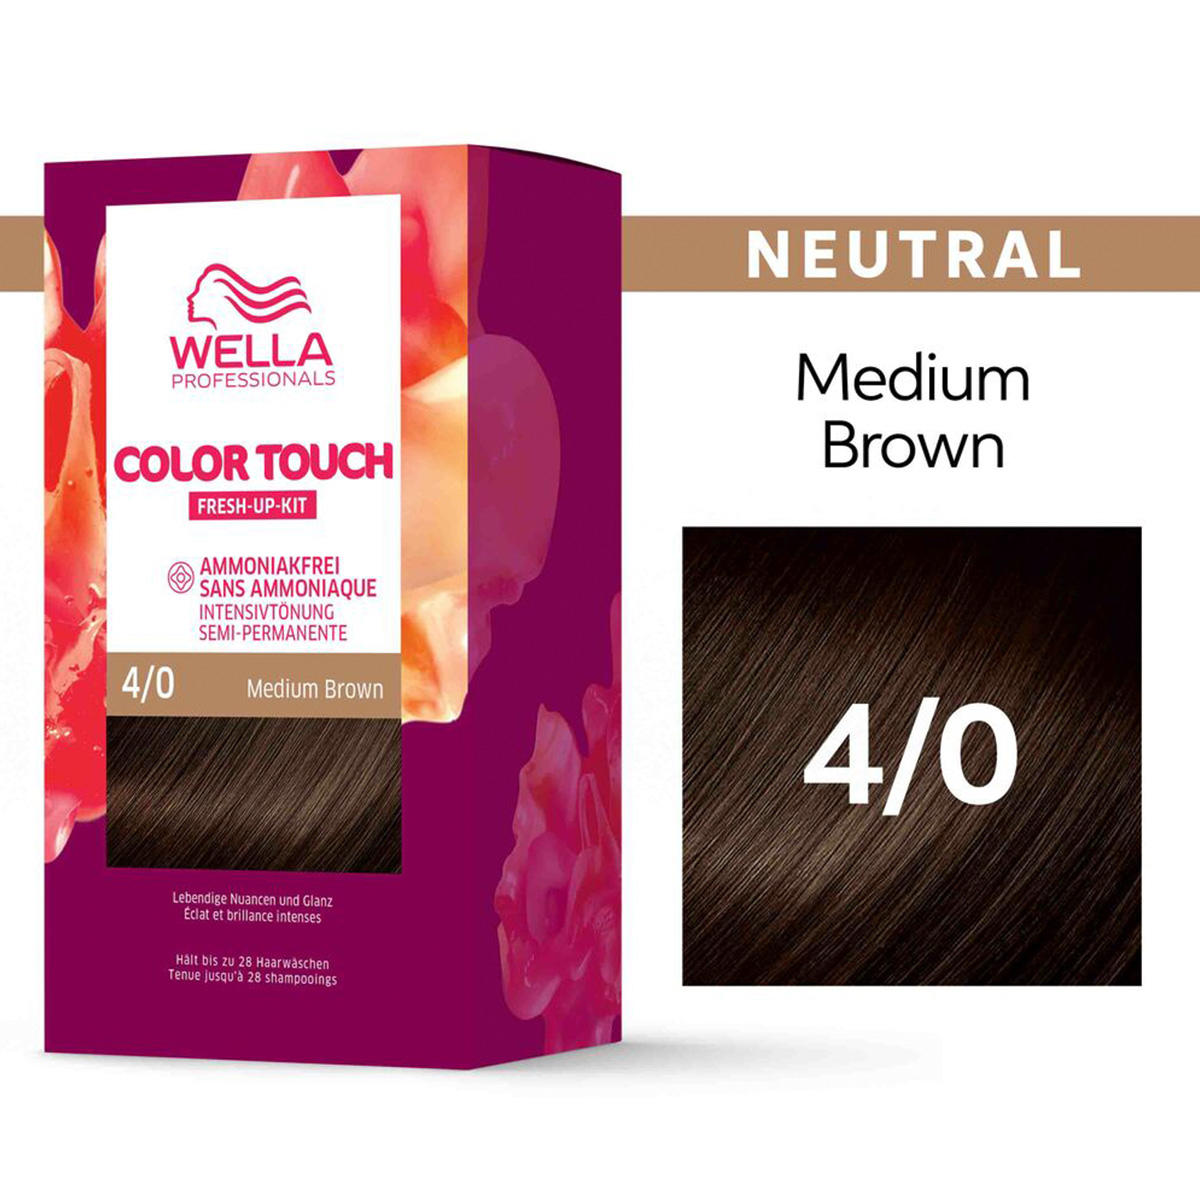 Wella Color Touch Fresh-Up-Kit 4/0 Marrón medio 130 ml - 2